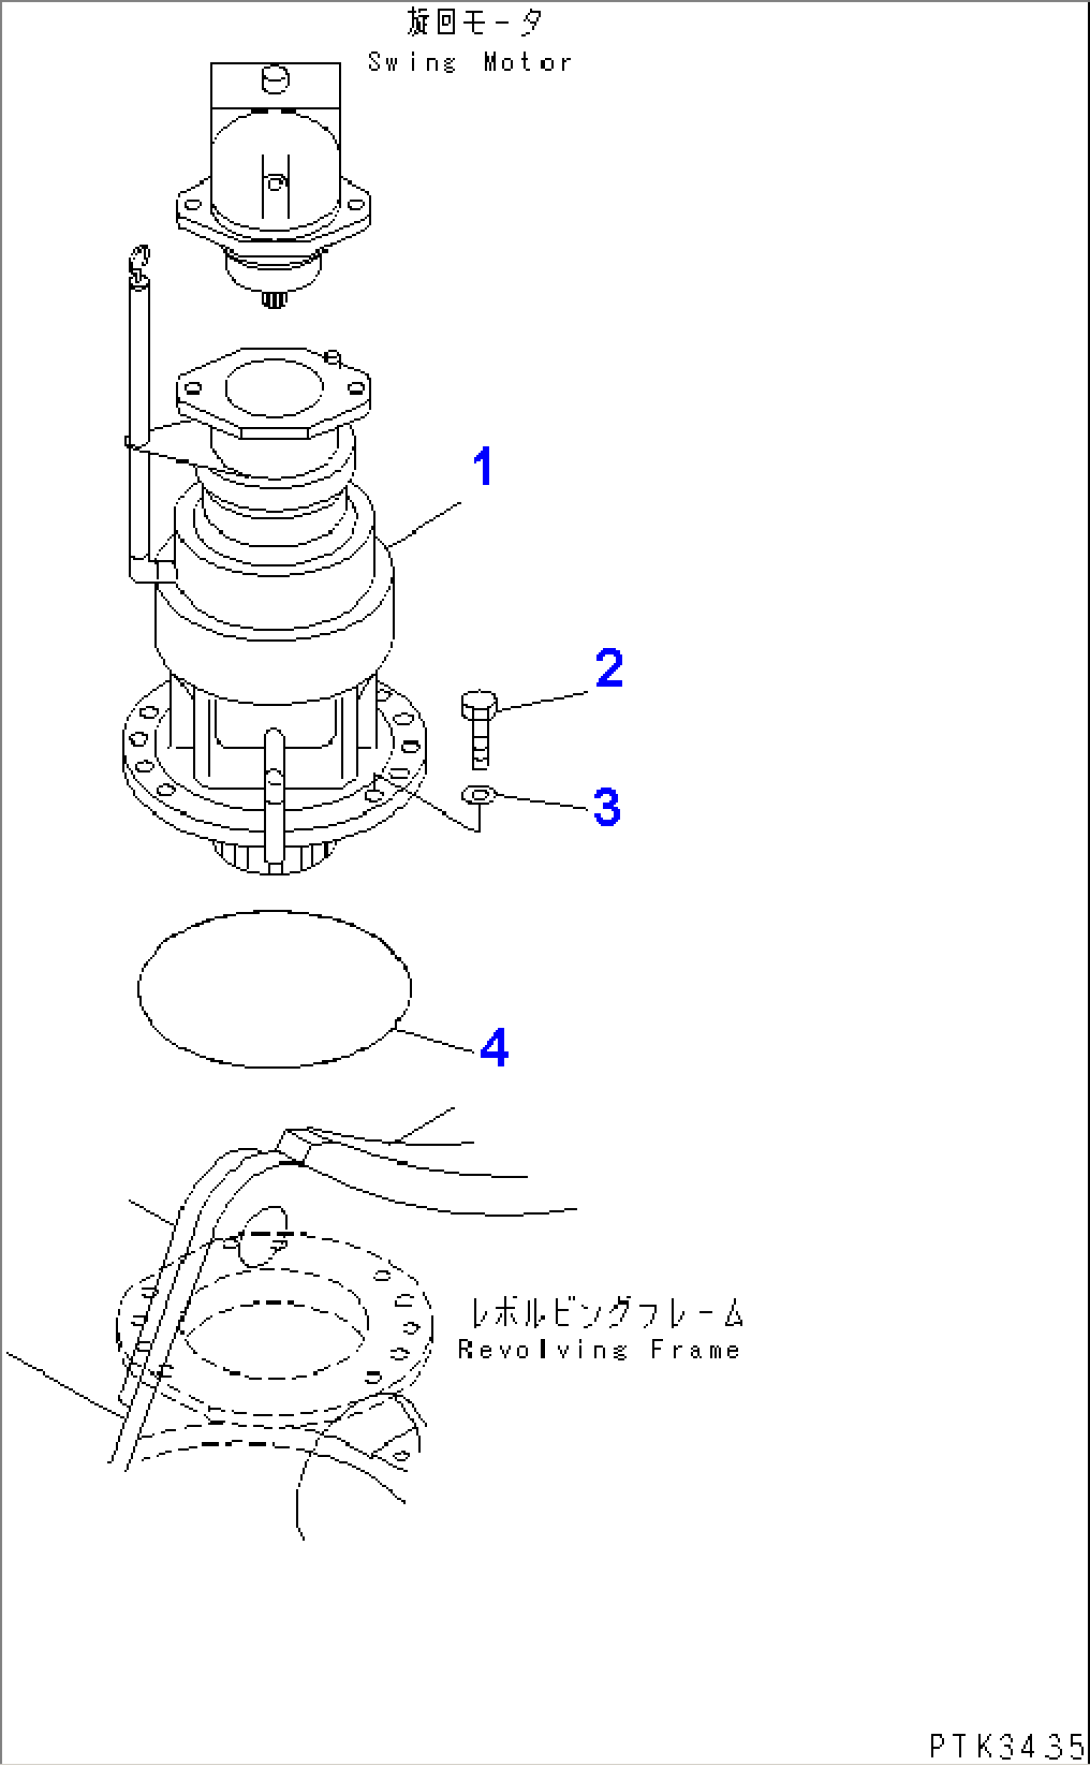 SWING MACHINERY (RELATED PARTS)